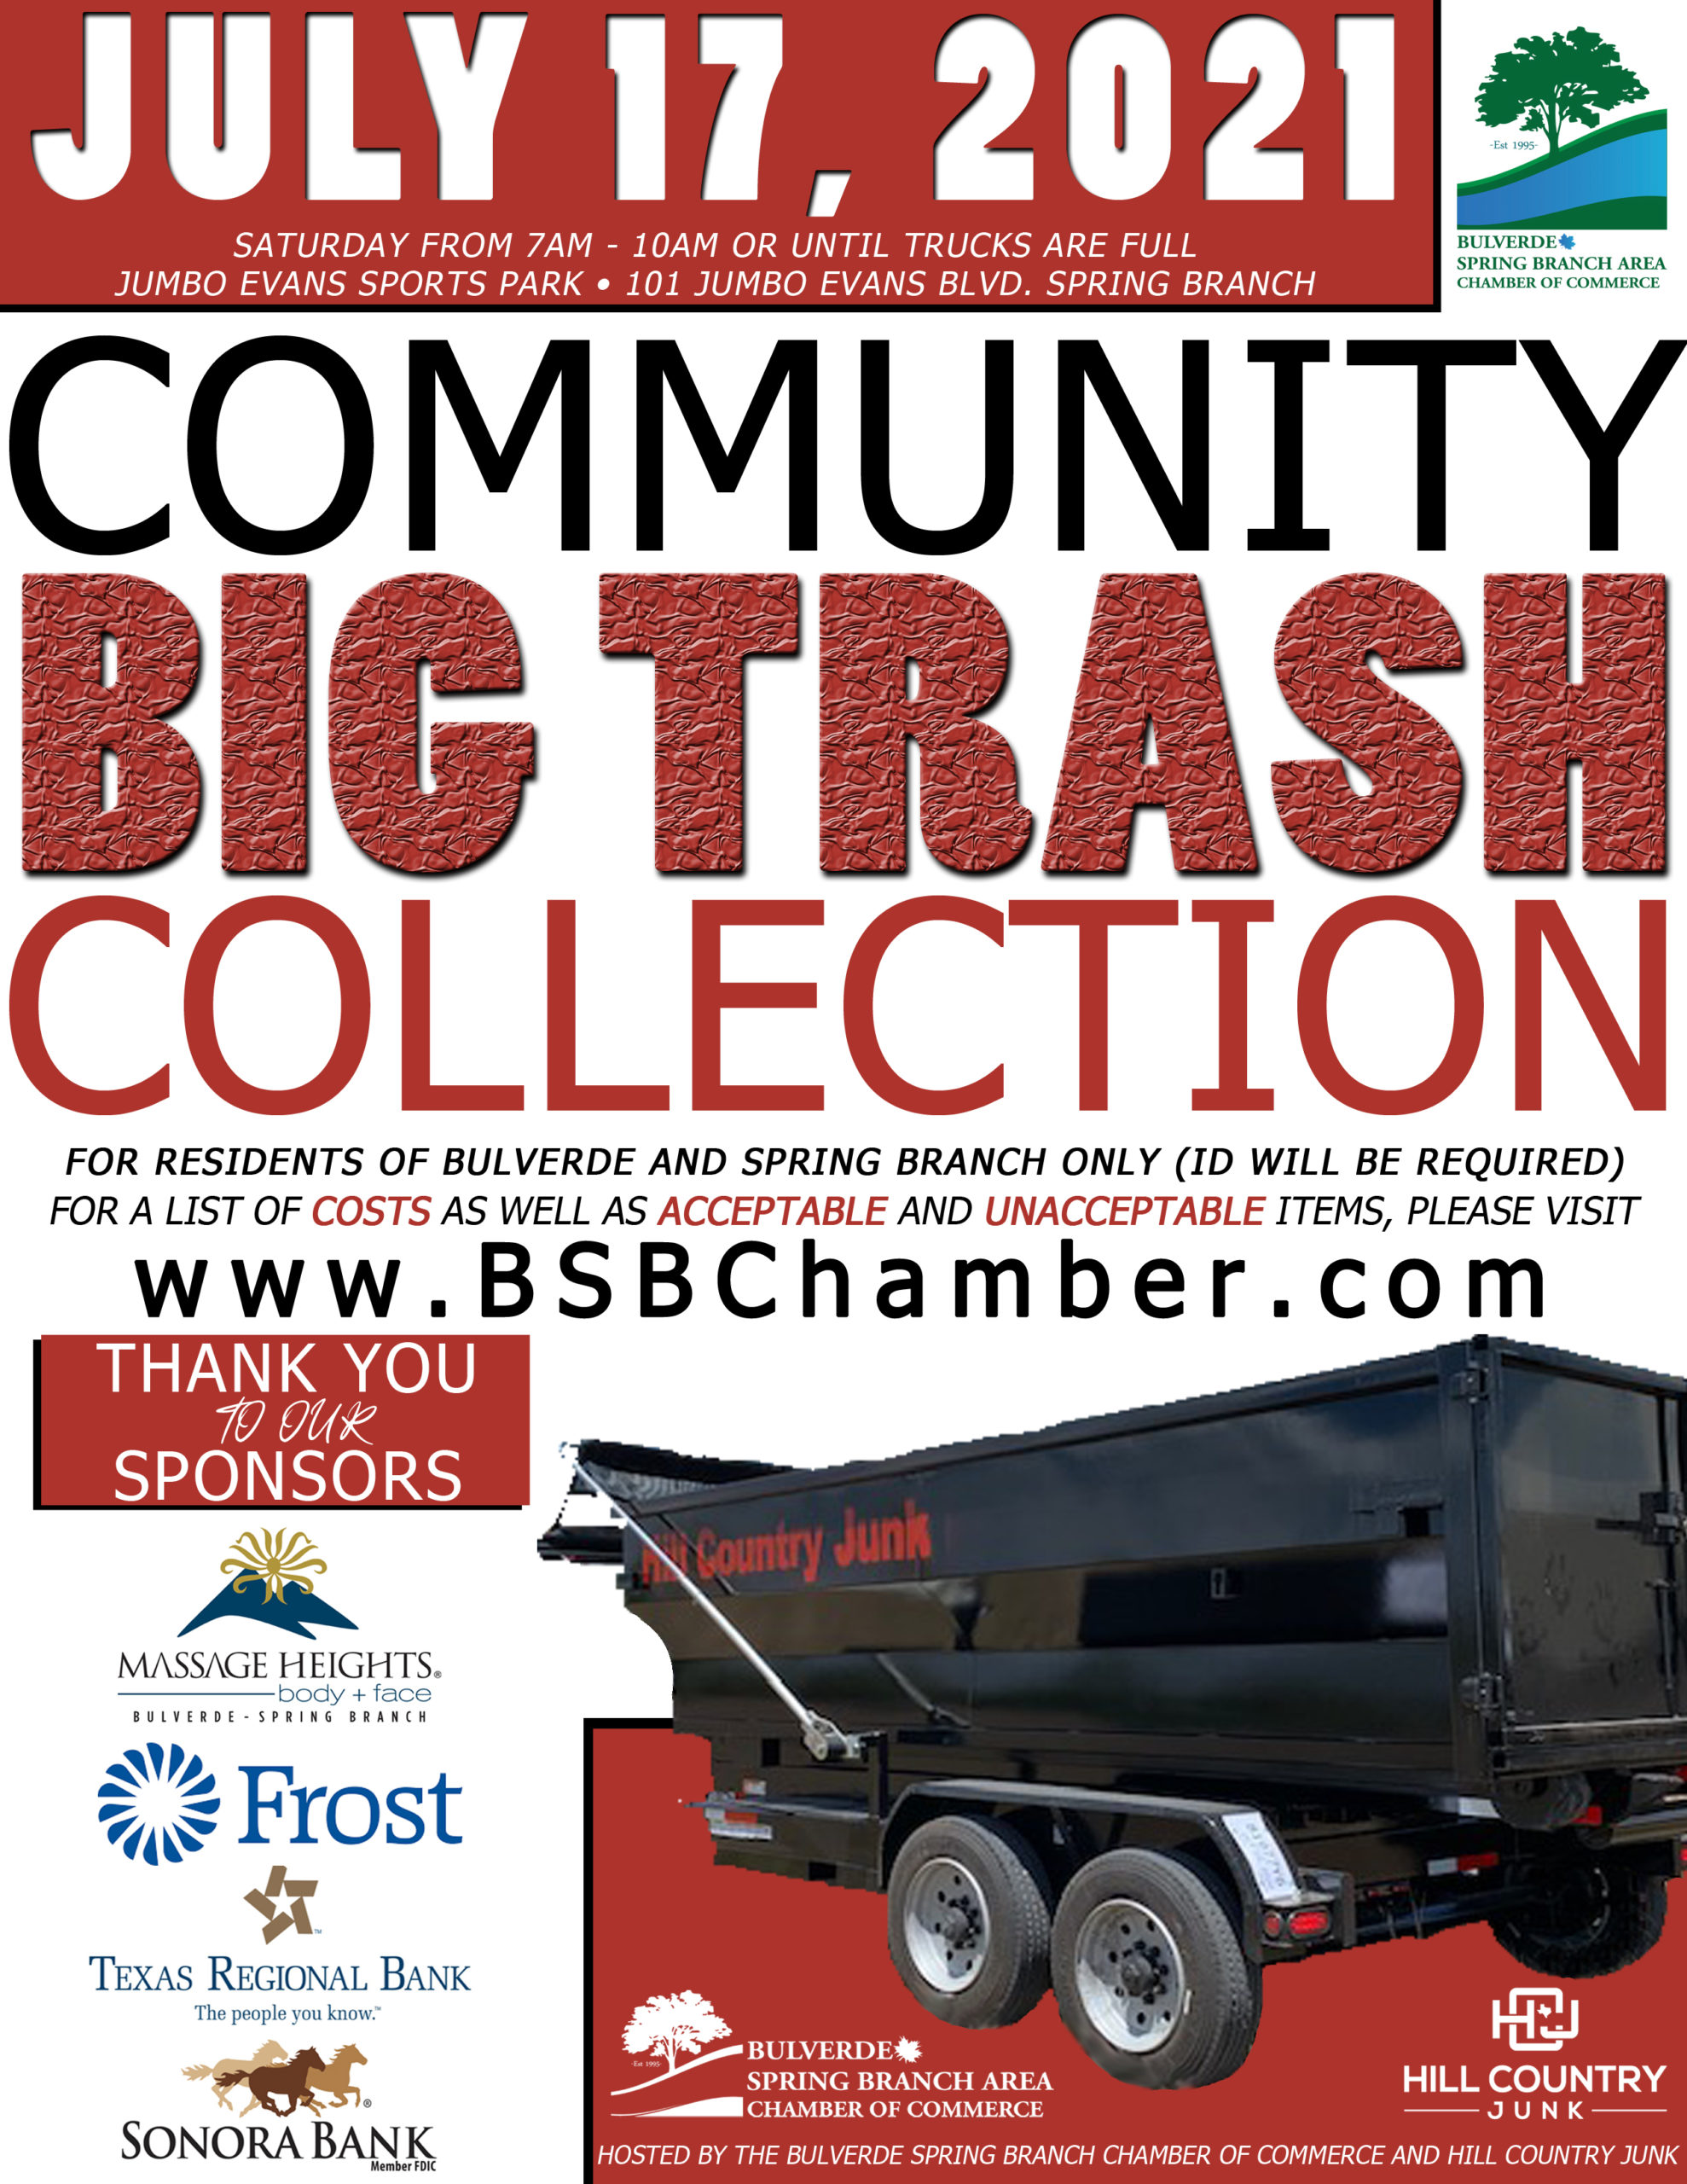 Big Trash Collection July 17, 2021 City of Spring Branch, Texas